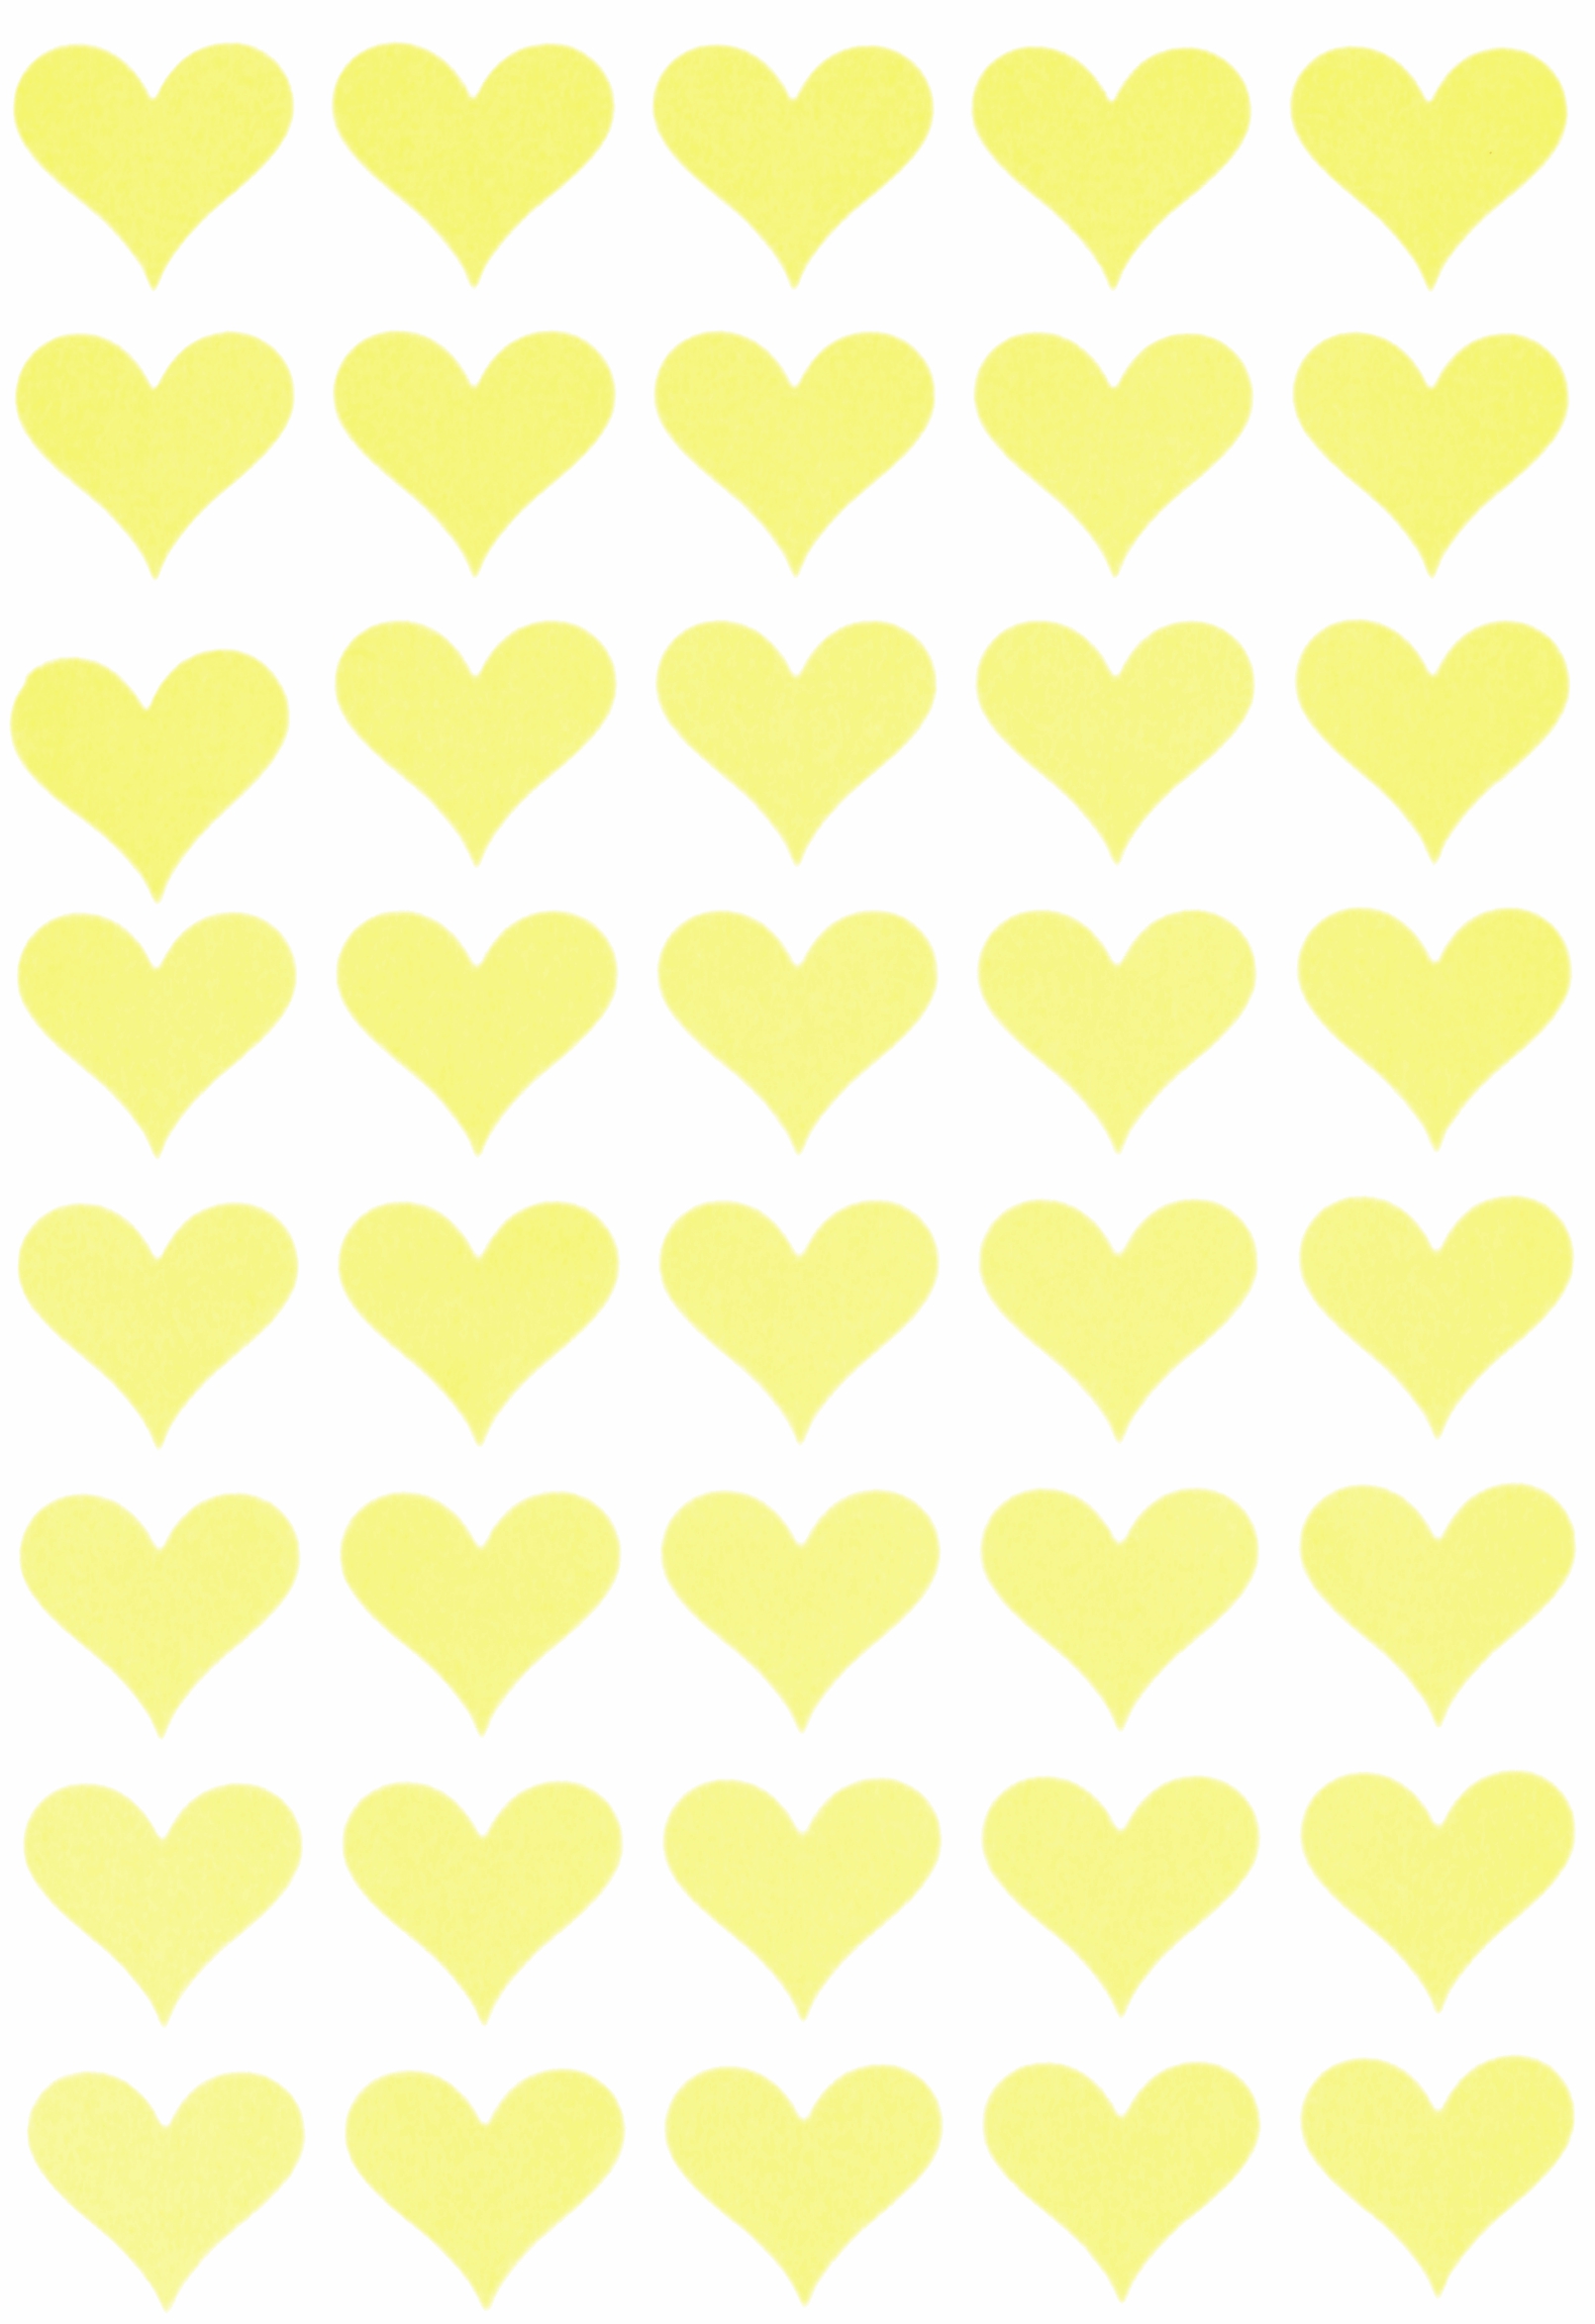 Royal Green 19MM Pastel Yellow Heart Stickers for Arts and Crafts  Decorative Envelope Seals for Invitations, Party Favors, and Crafts 1000  Pack 